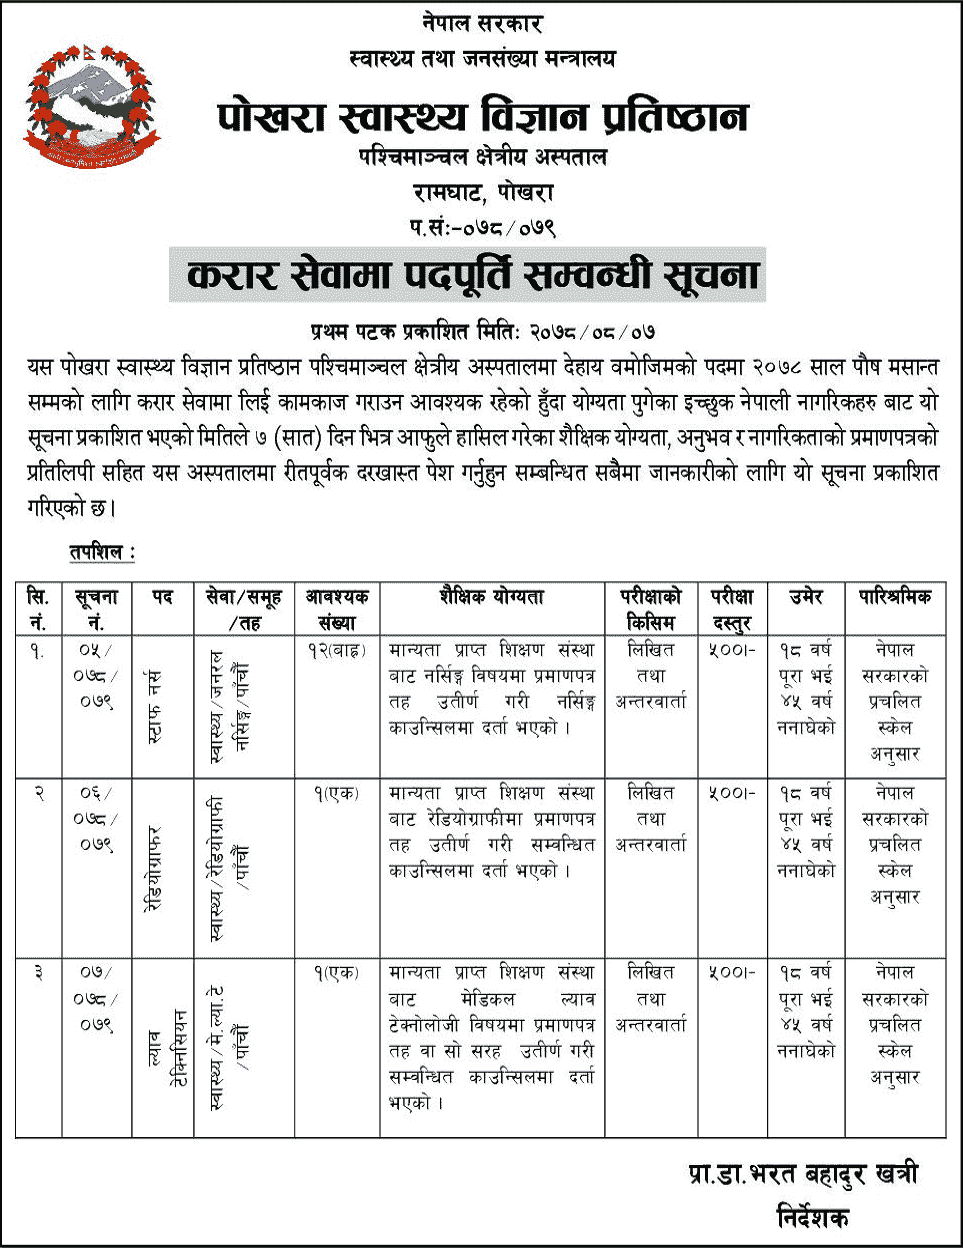 Pokhara Academy of Health Sciences Vacancy for Nurse, Radiographer and Lab Technician